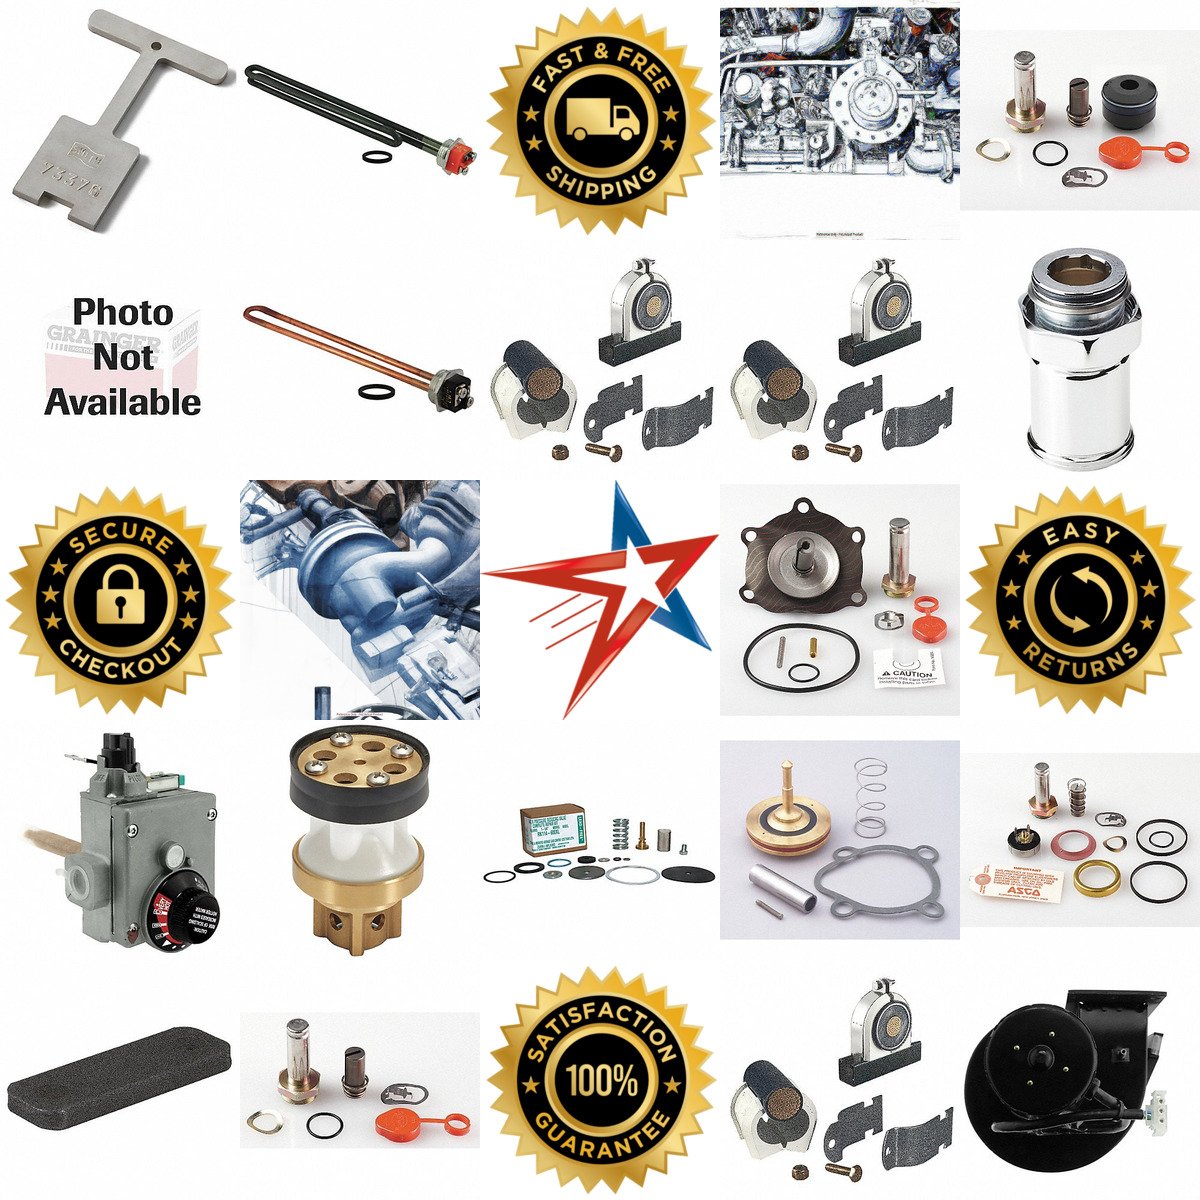 A selection of Parts products on GoVets